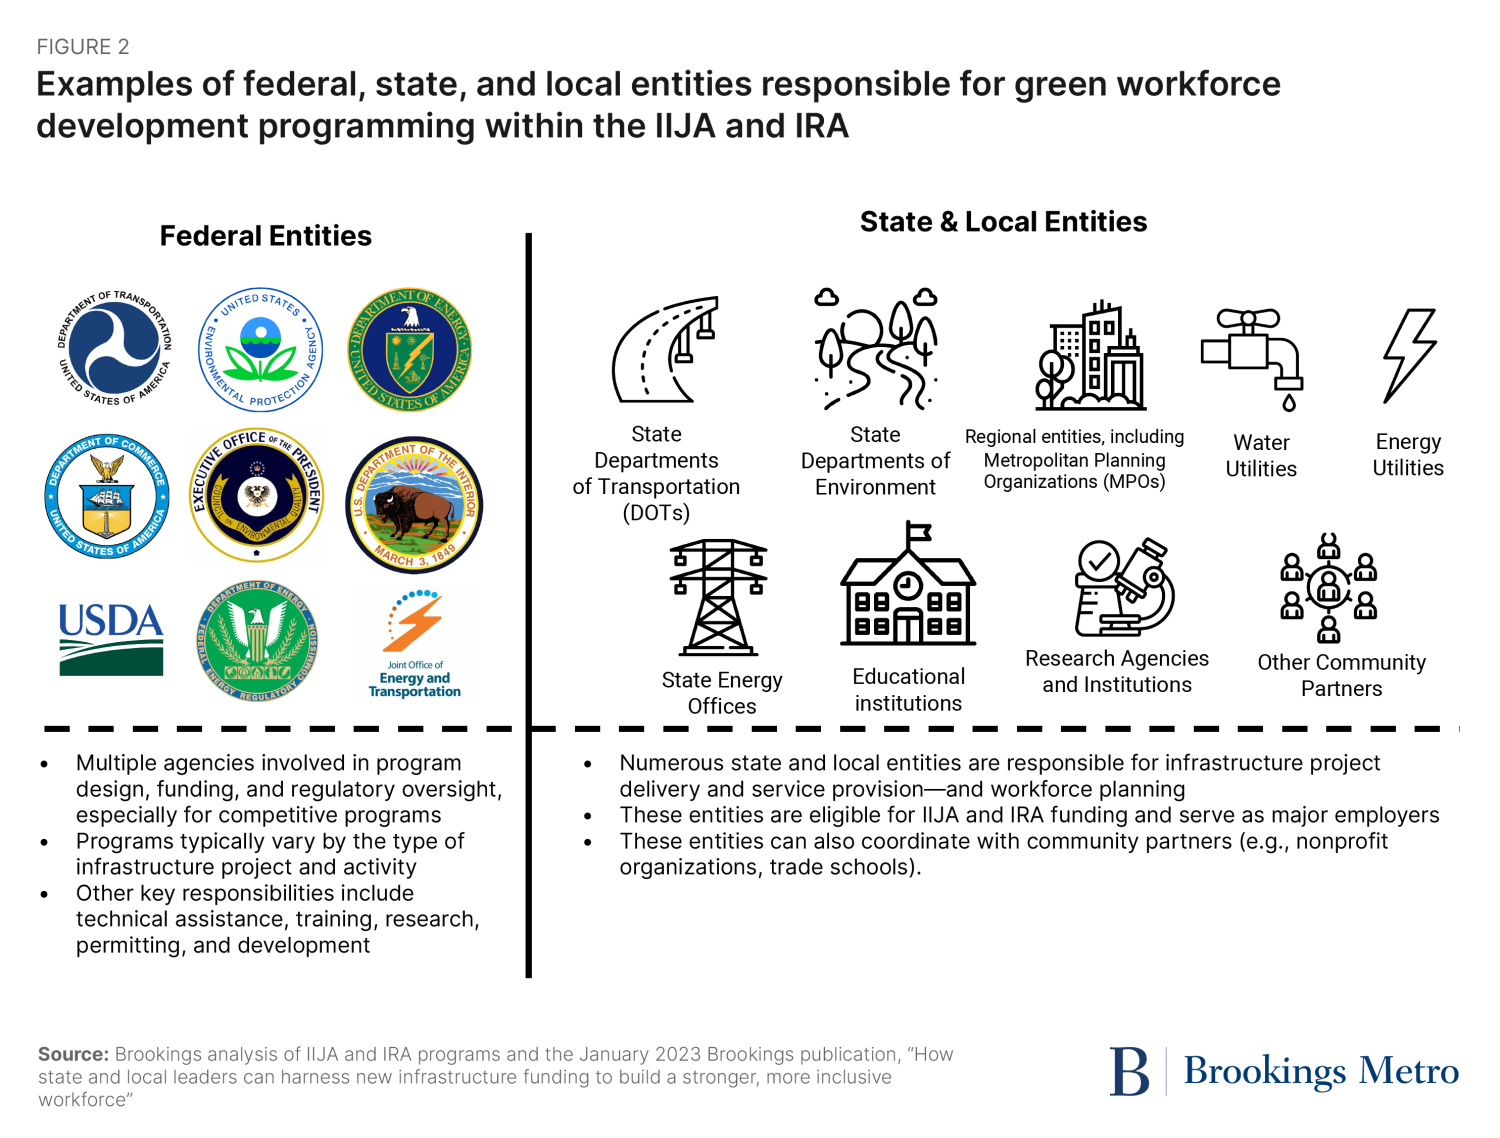 Figure 2. Examples of federal, state, and local entities responsible for green workforce development programming within the IIJA and IRA